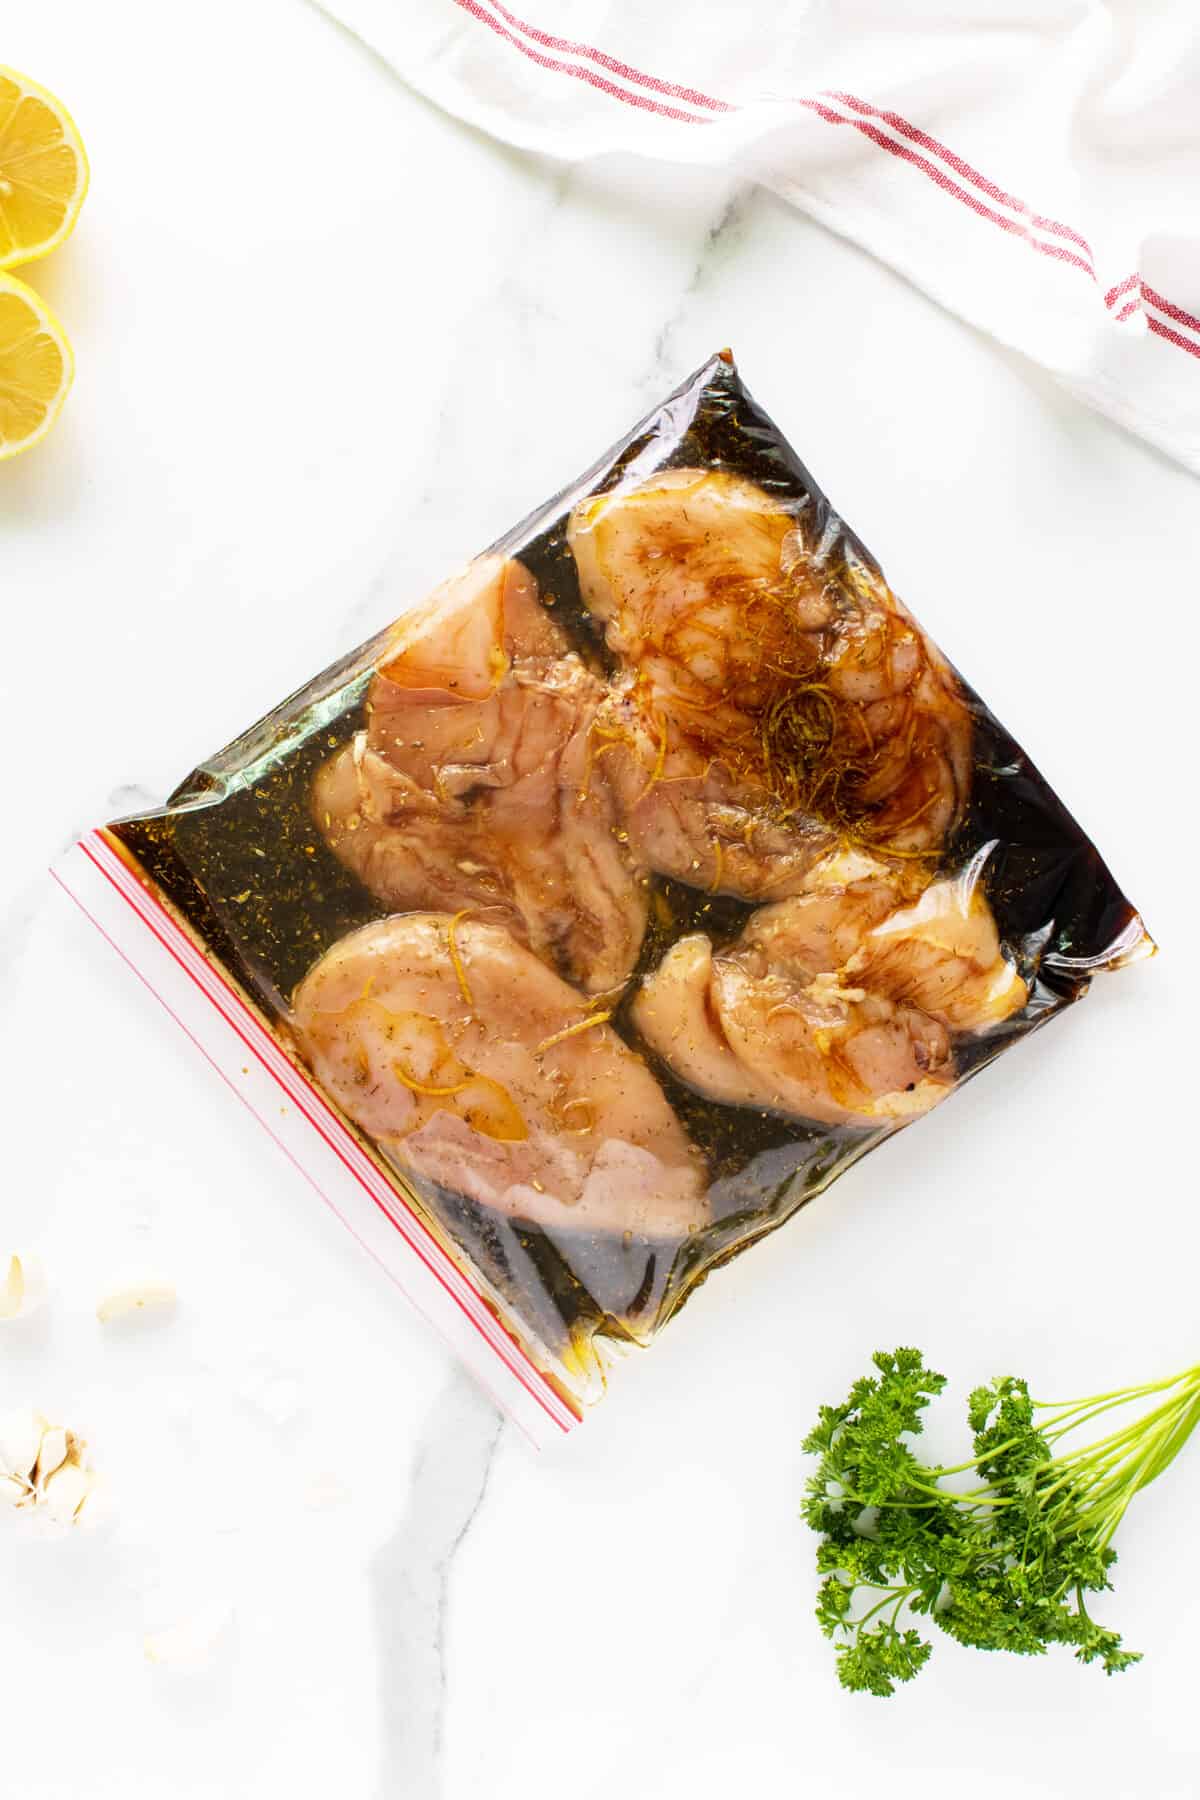 Grilled Chicken Breast in a bag with marinade